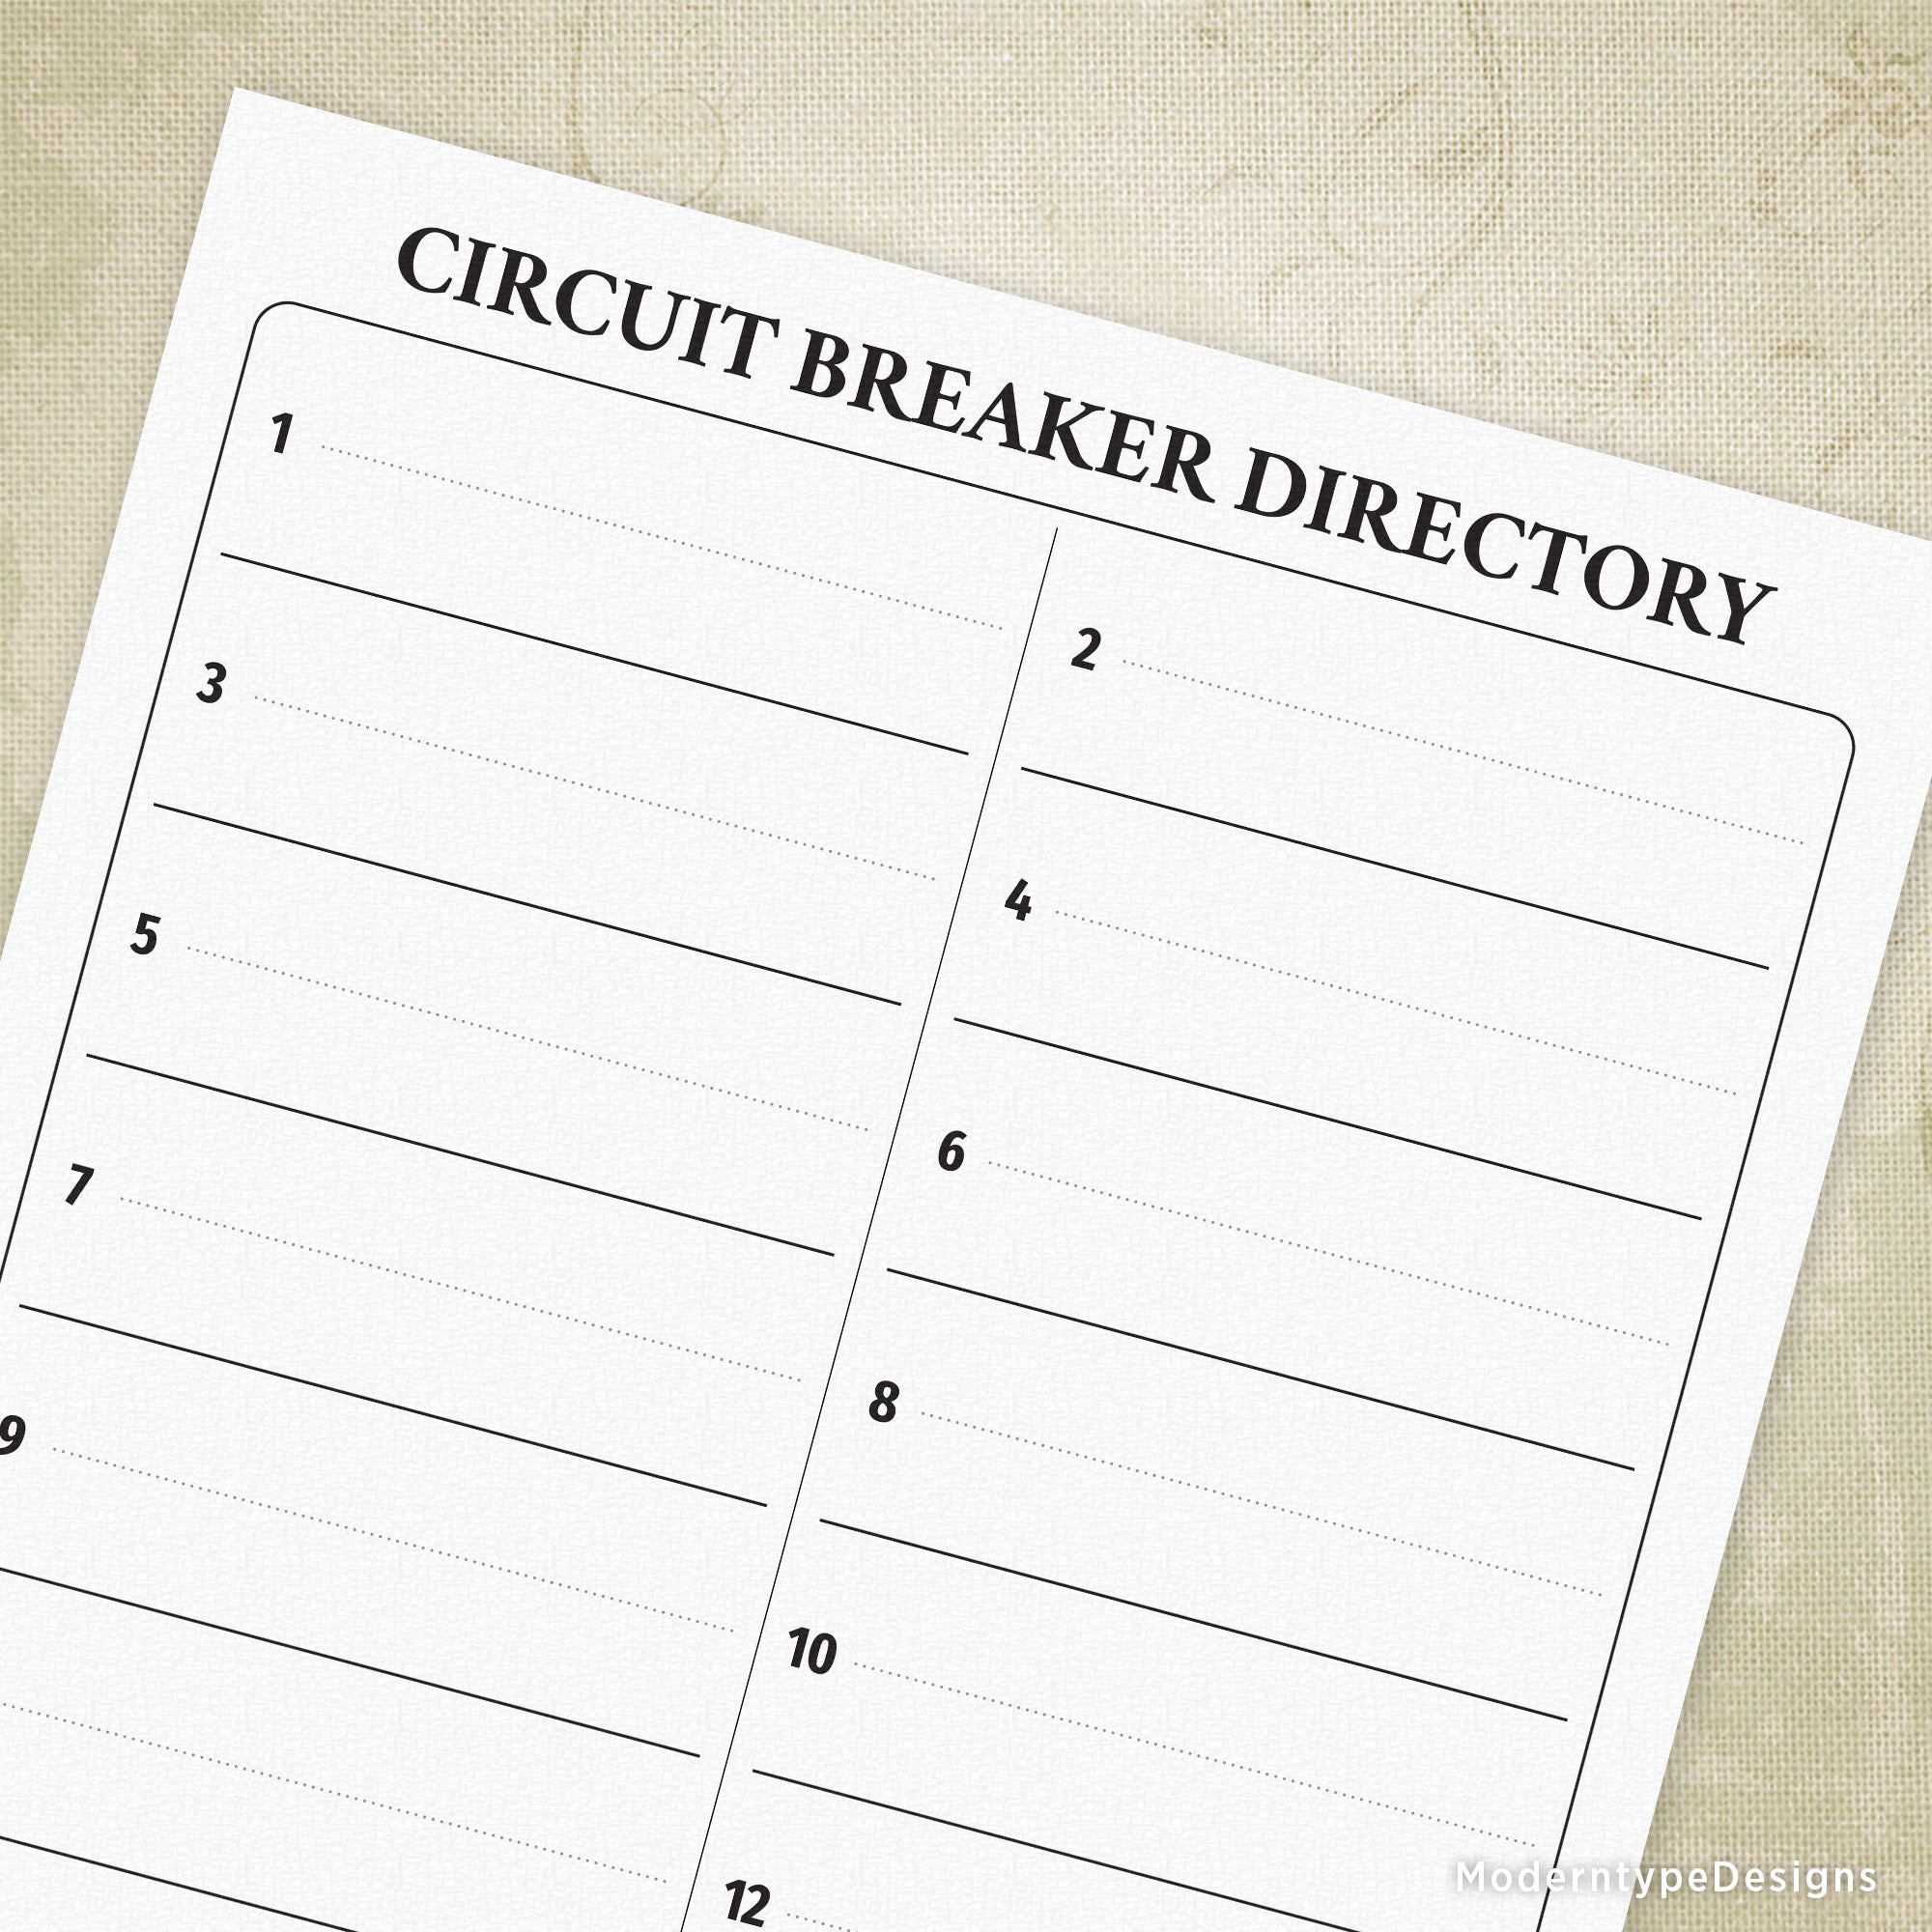 Breaker Directory Printable with 16 Circuits